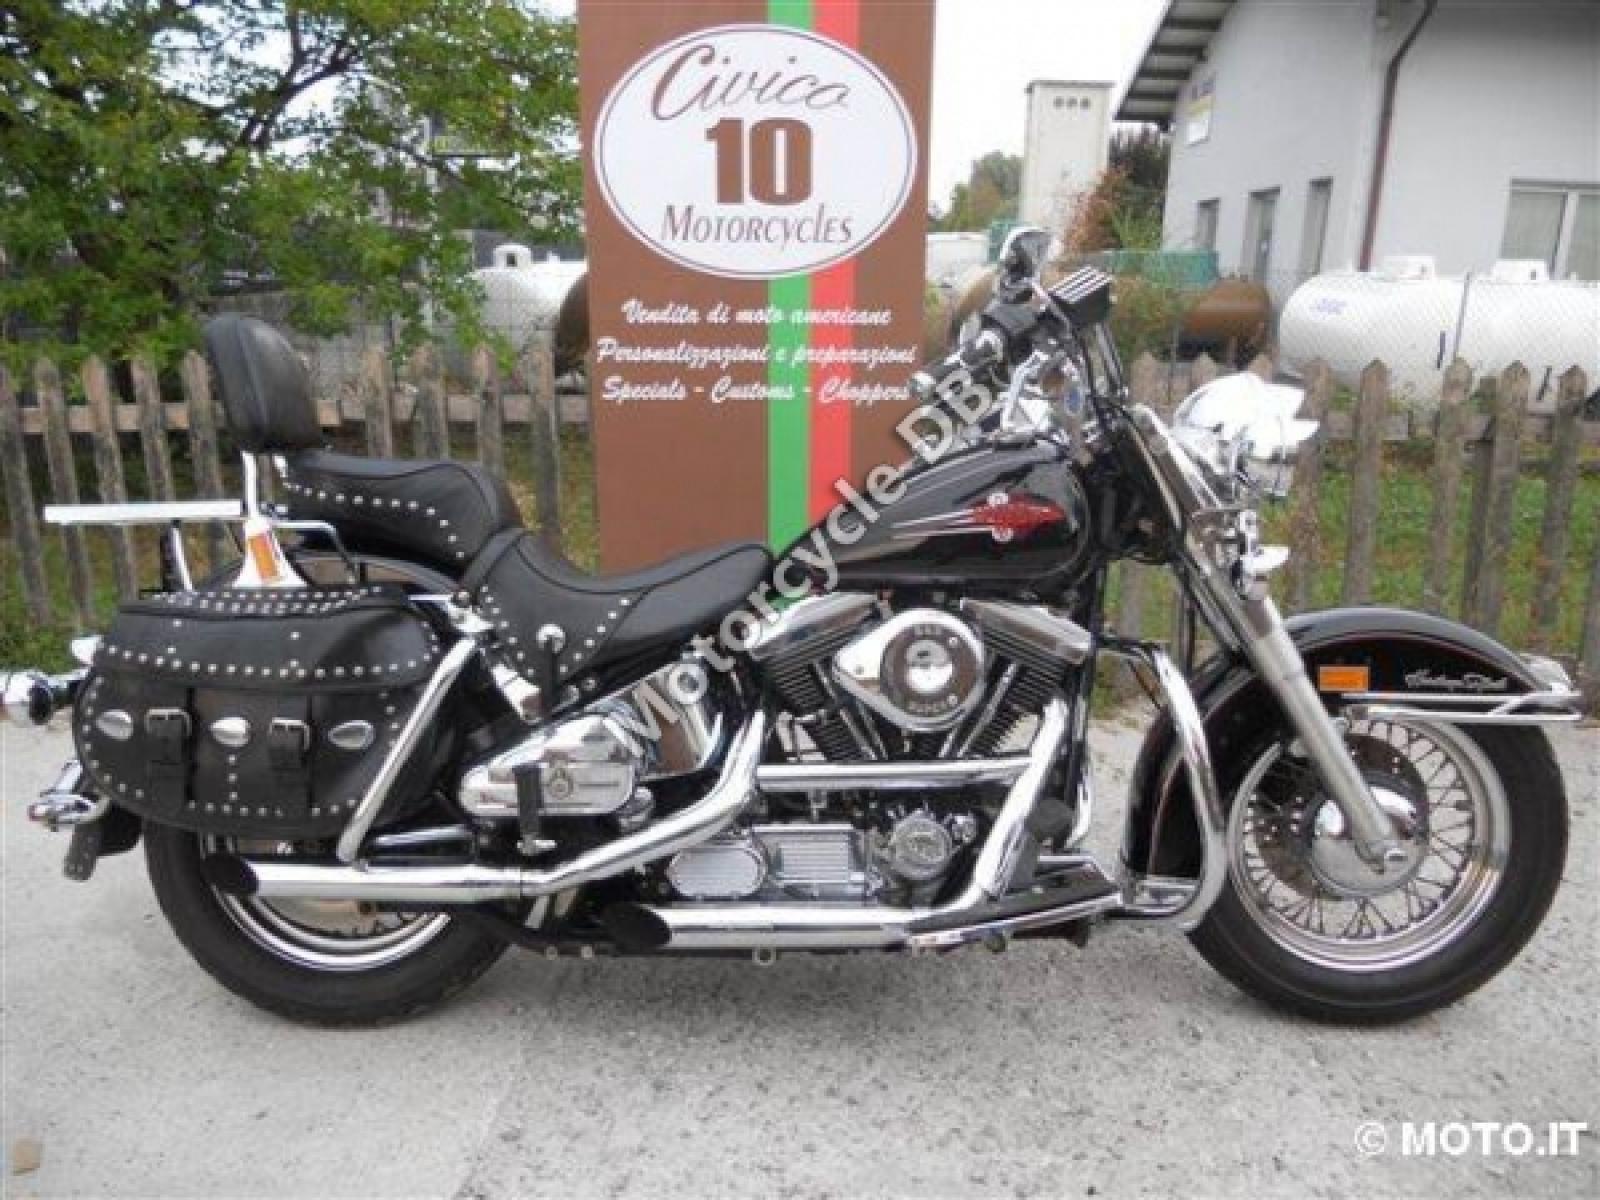 1991 Heritage Softail Classic Promotion Off52